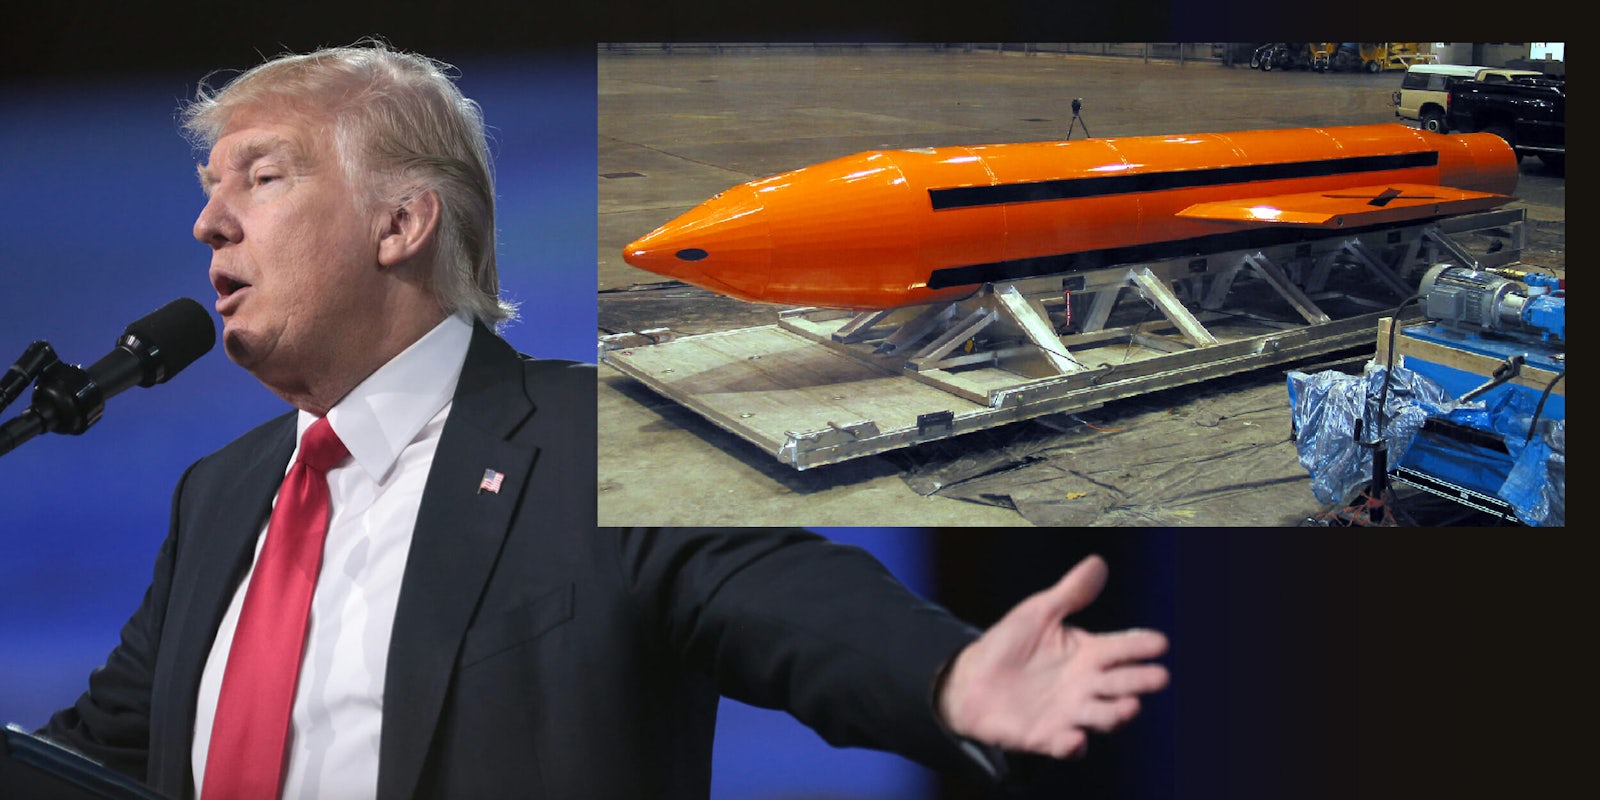 Donald Trump with 'Mother of All Bombs' GBU-43/B